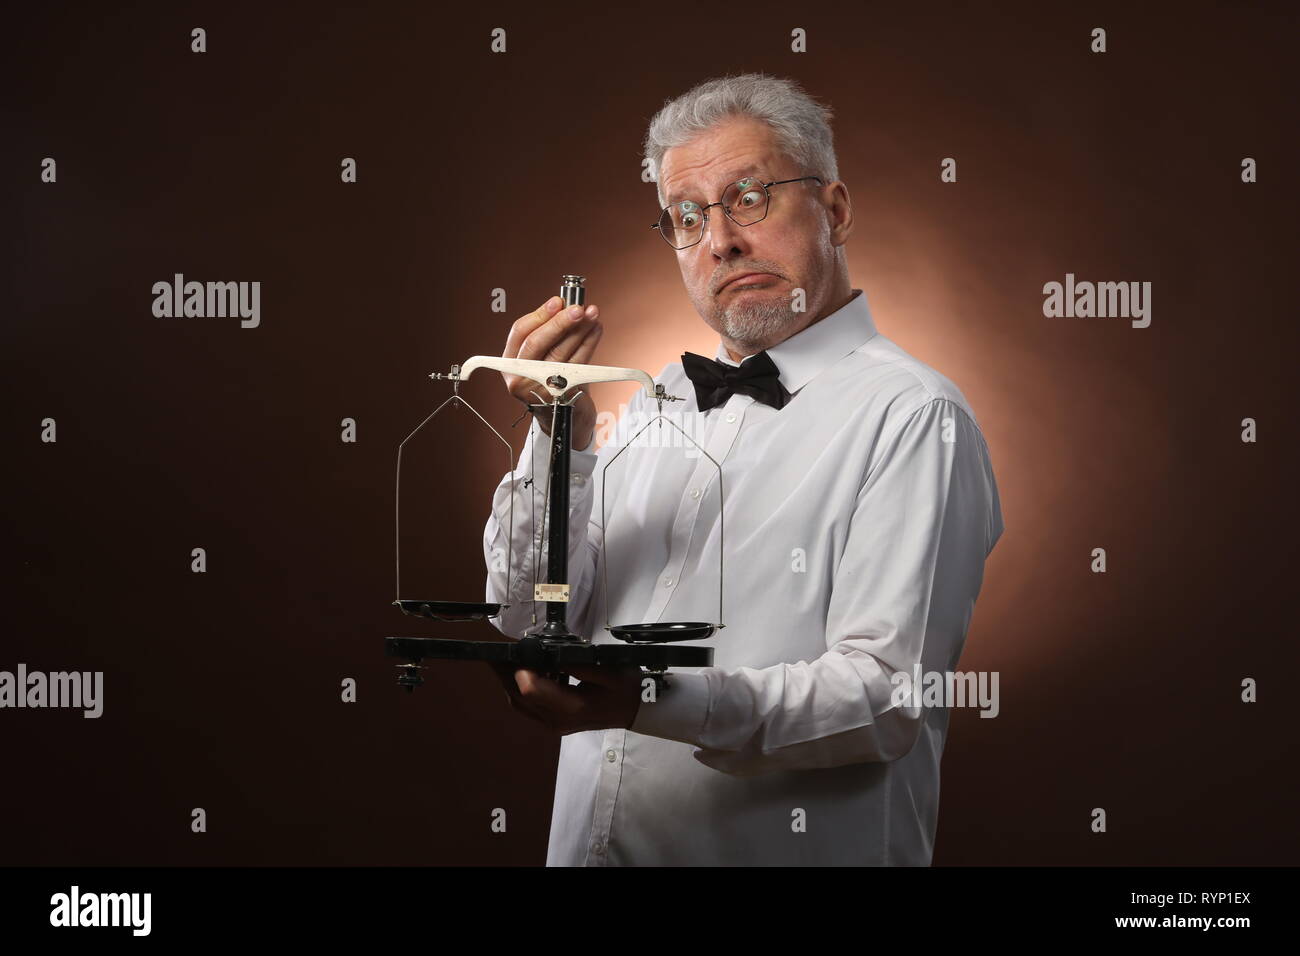 Elderly gray-haired man 50s, in white shirt, glasses and bow tie weighing something on scales with small kettlebells Stock Photo